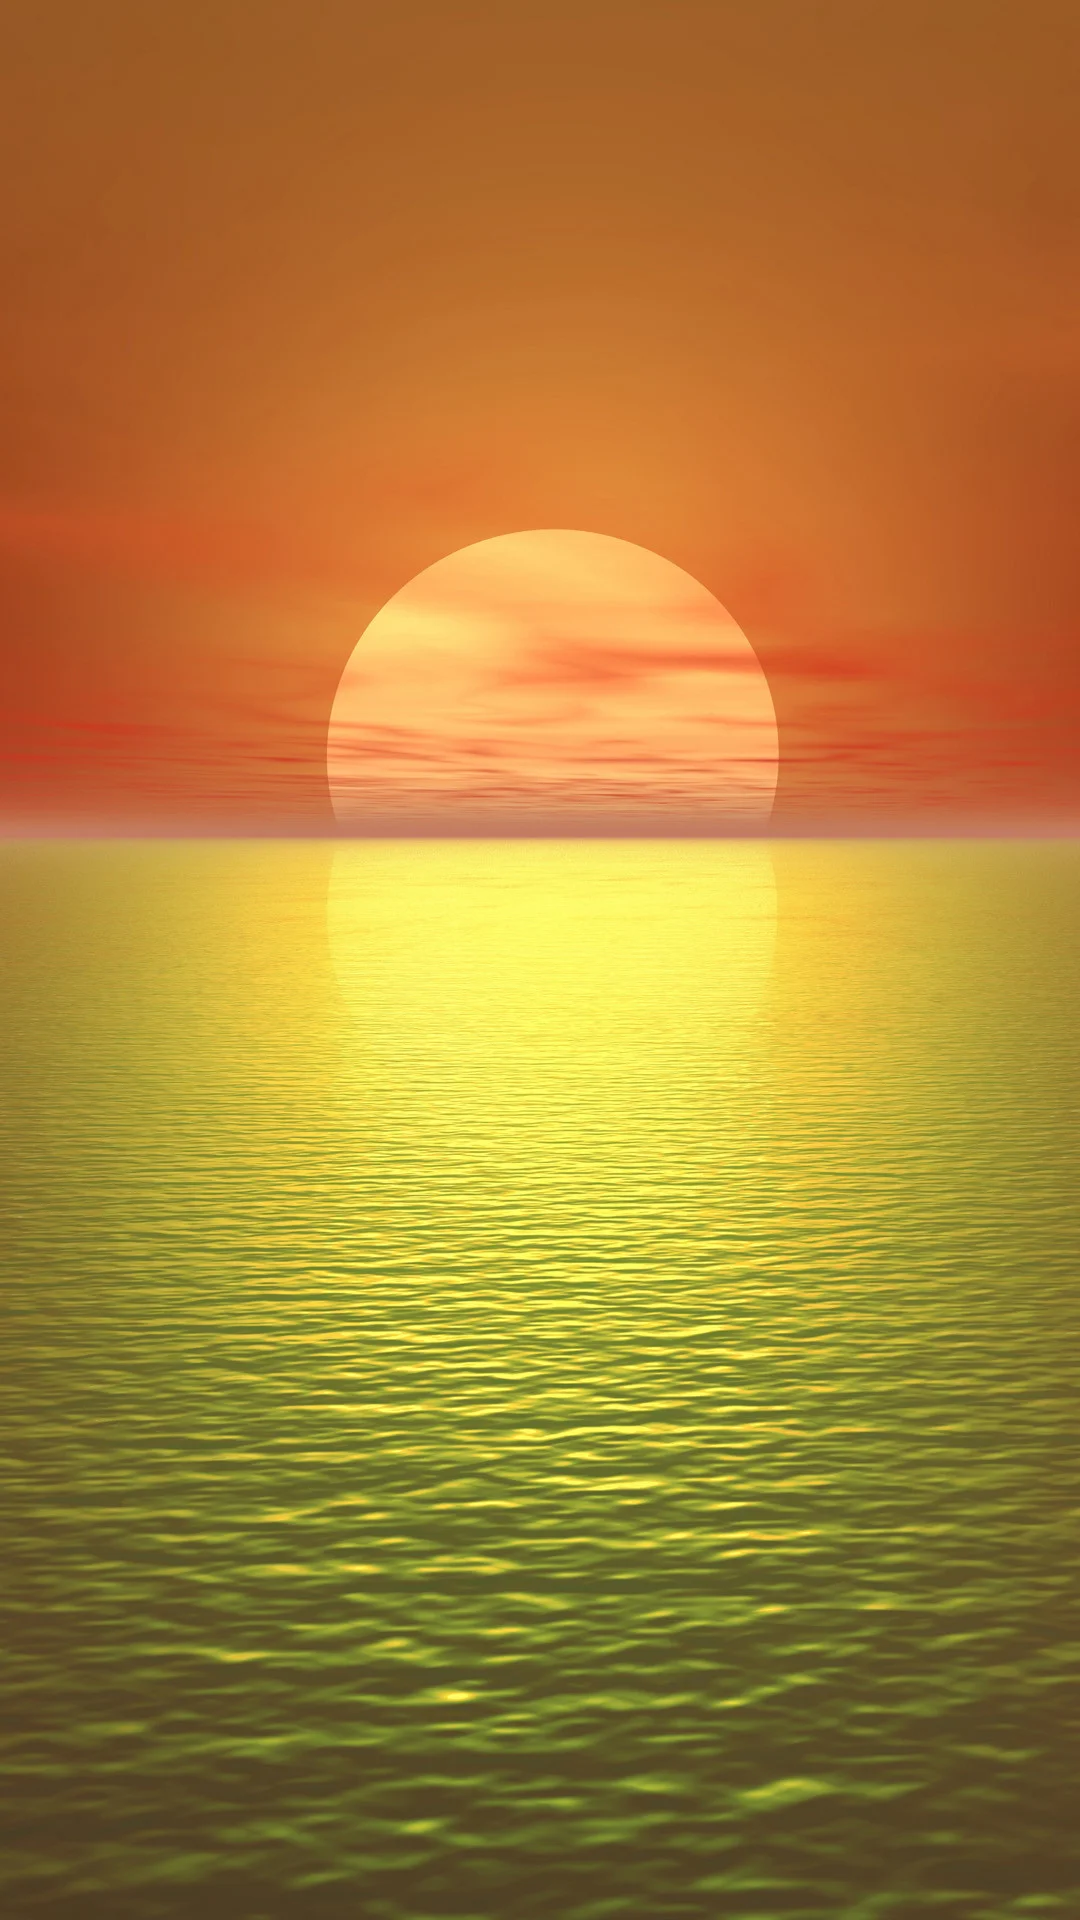 The most tranquil sunset iPhone 6 wallpaper Iphone 6 WallpaperCool WallpaperPhone